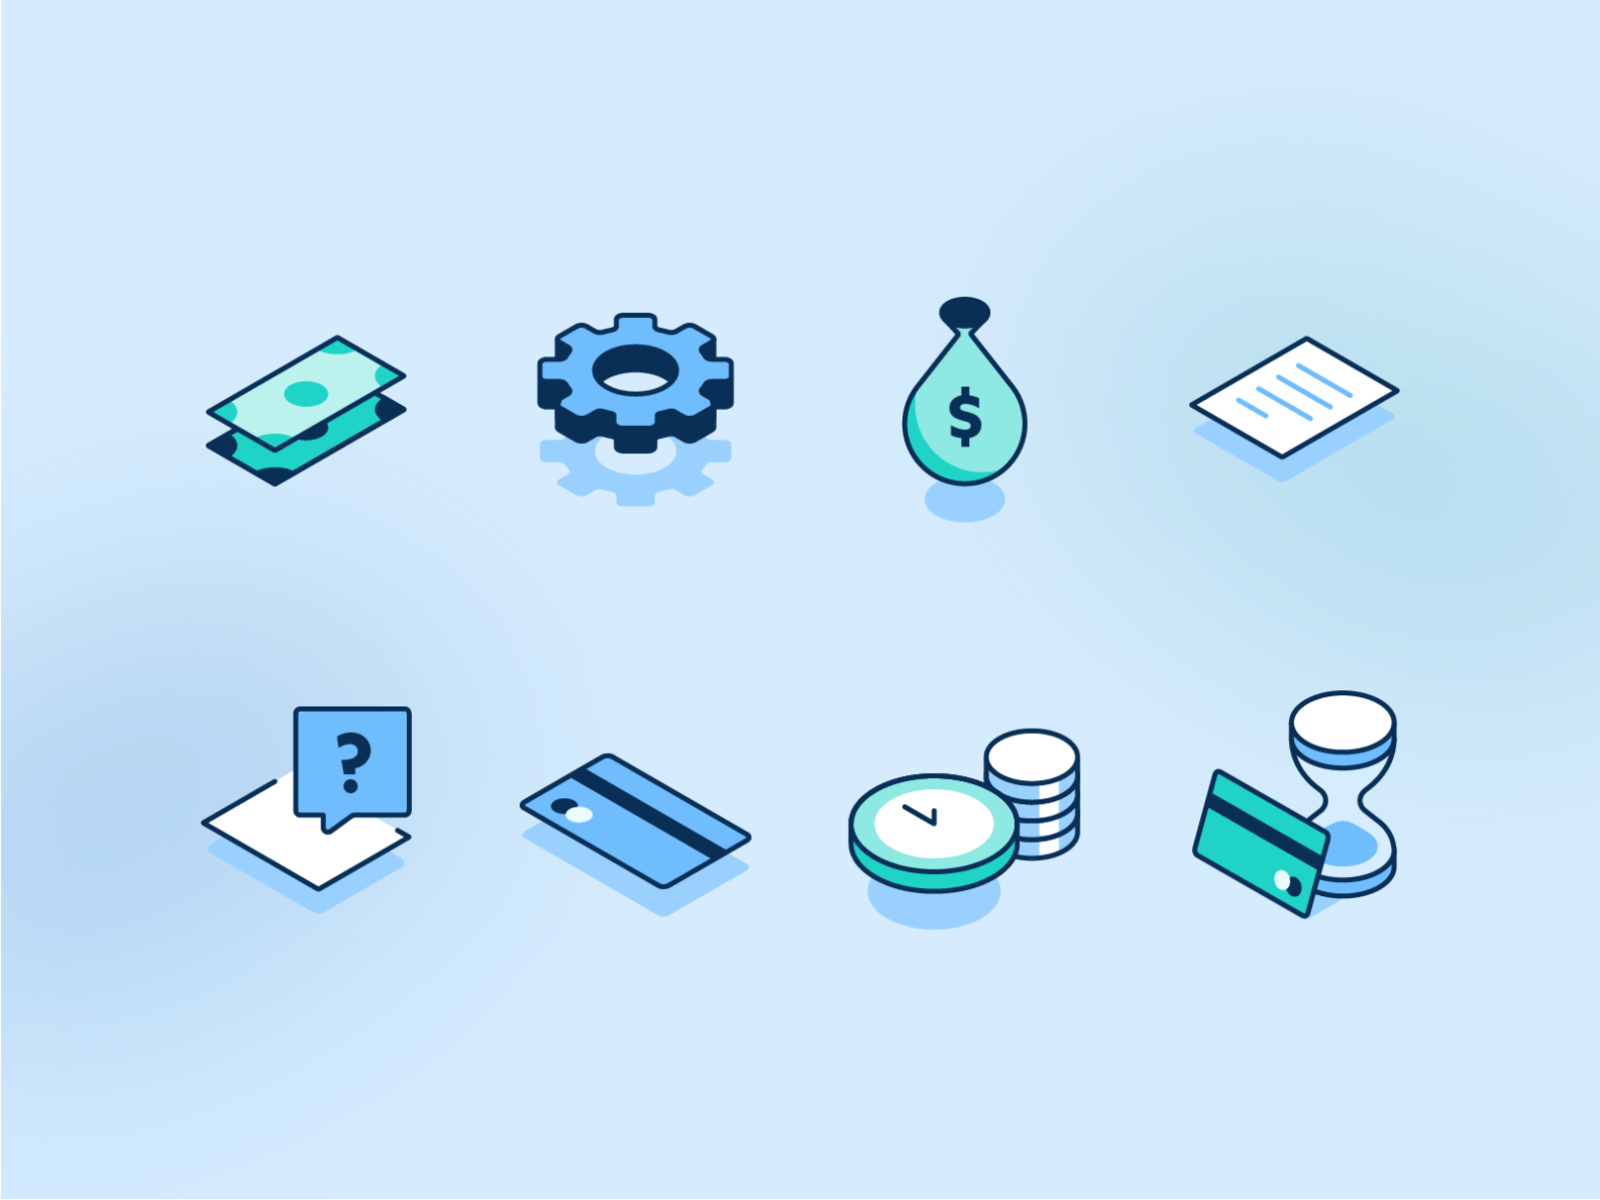 Pandemic Finance Icons balance bank cash clean covid19 credit credit card expense finance icons illustration isometric lines money money bag pandemic payment